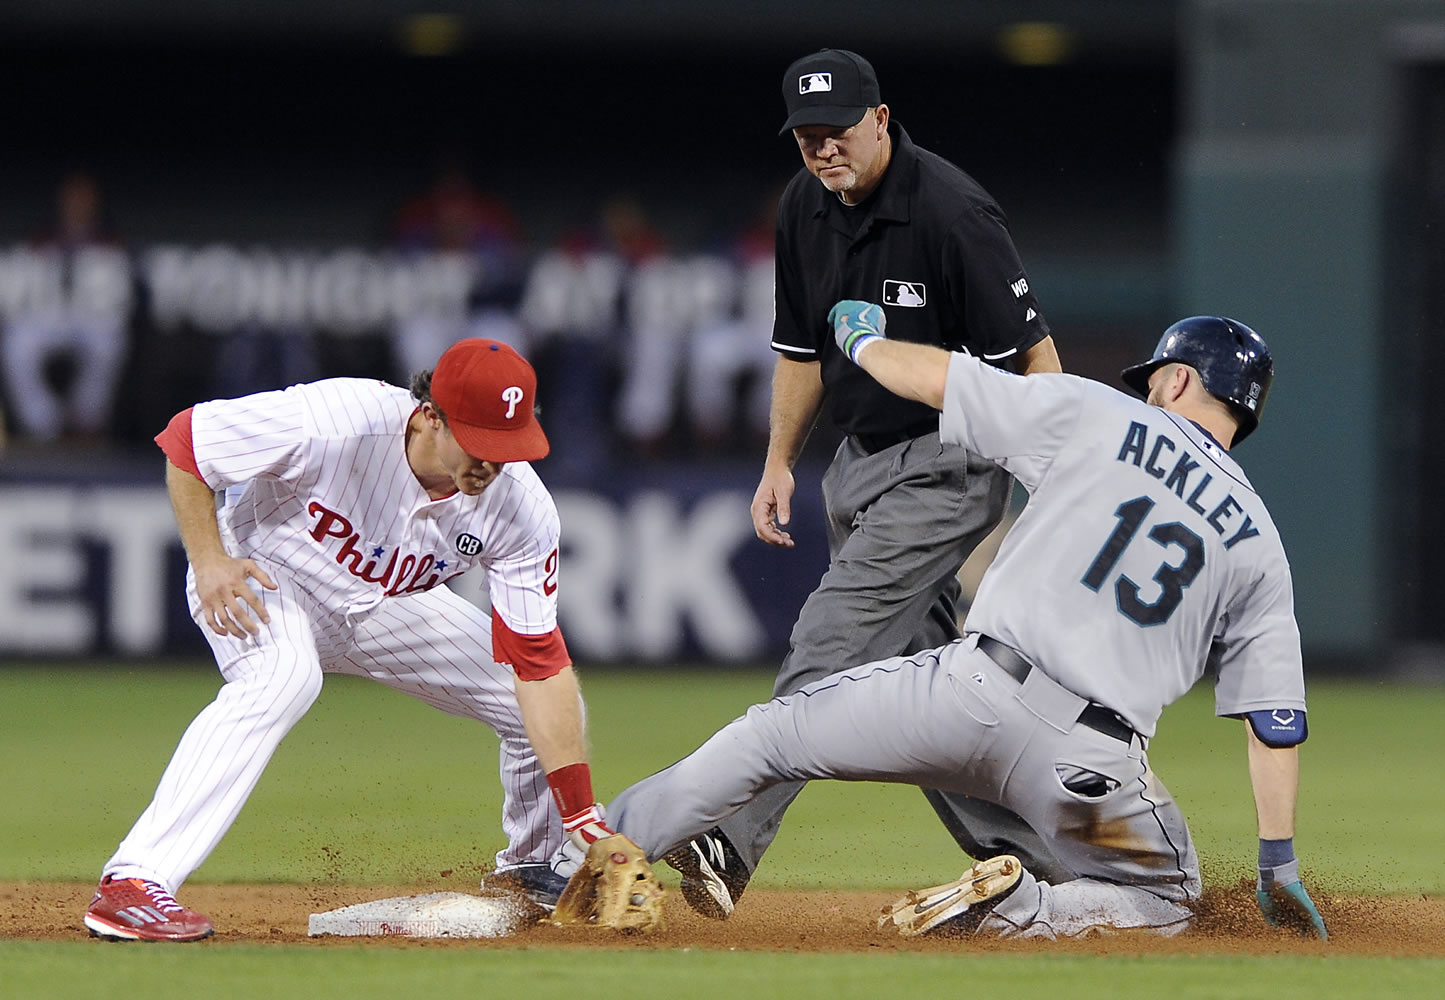 Seattle Mariners' Dustin Ackley (13) hits a double to left field and slides ahead of a tag from Philadelphia Phillies second baseman Chase Utley in the third inning of an interleague baseball game on Monday, Aug. 18, 2014, in Philadelphia.